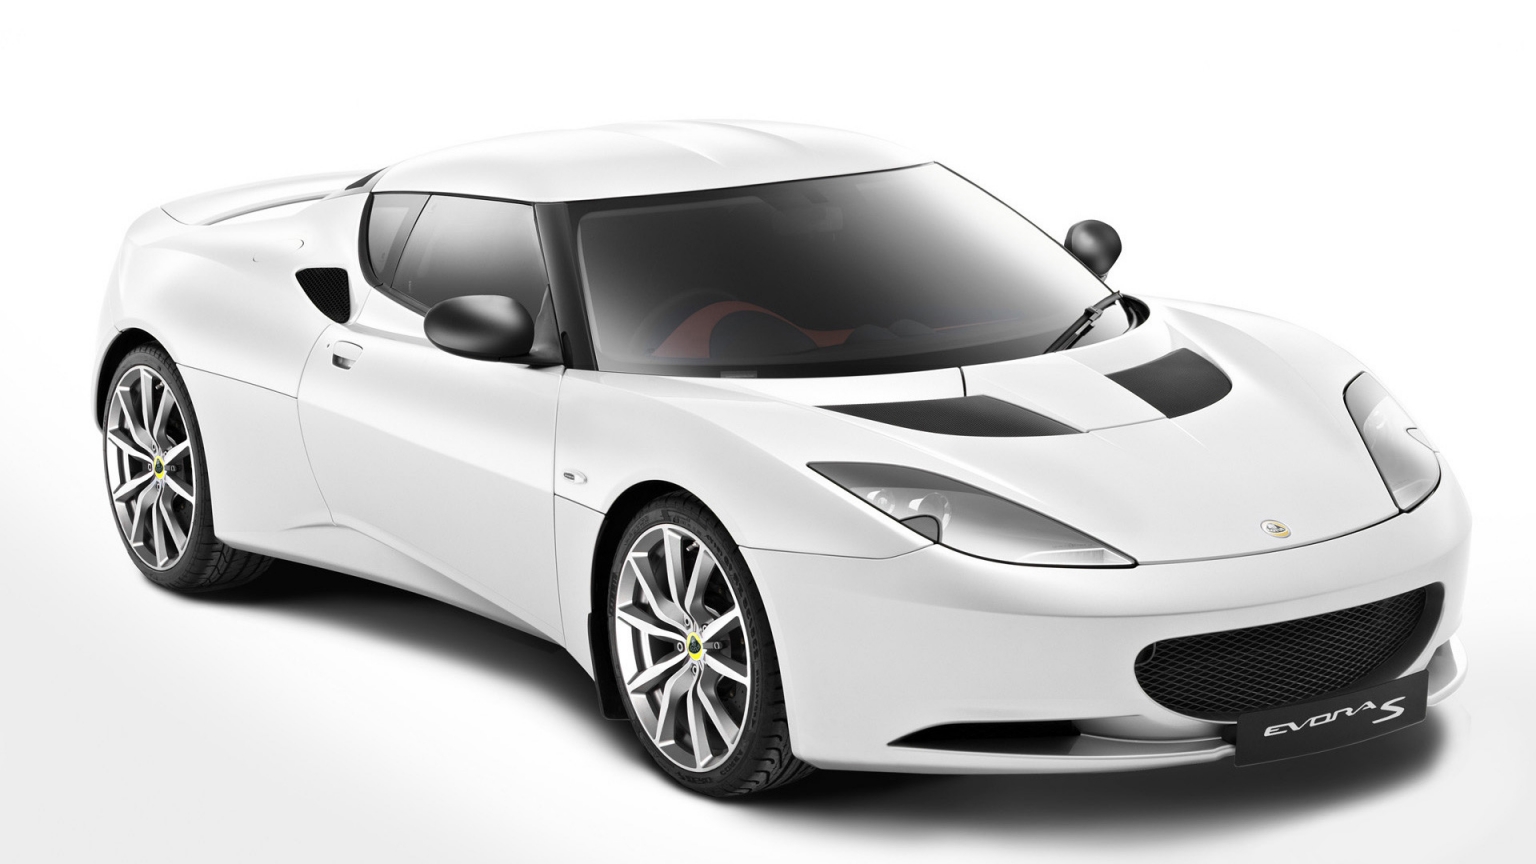 Lotus Evora S 2011 Front Angle for 1536 x 864 HDTV resolution